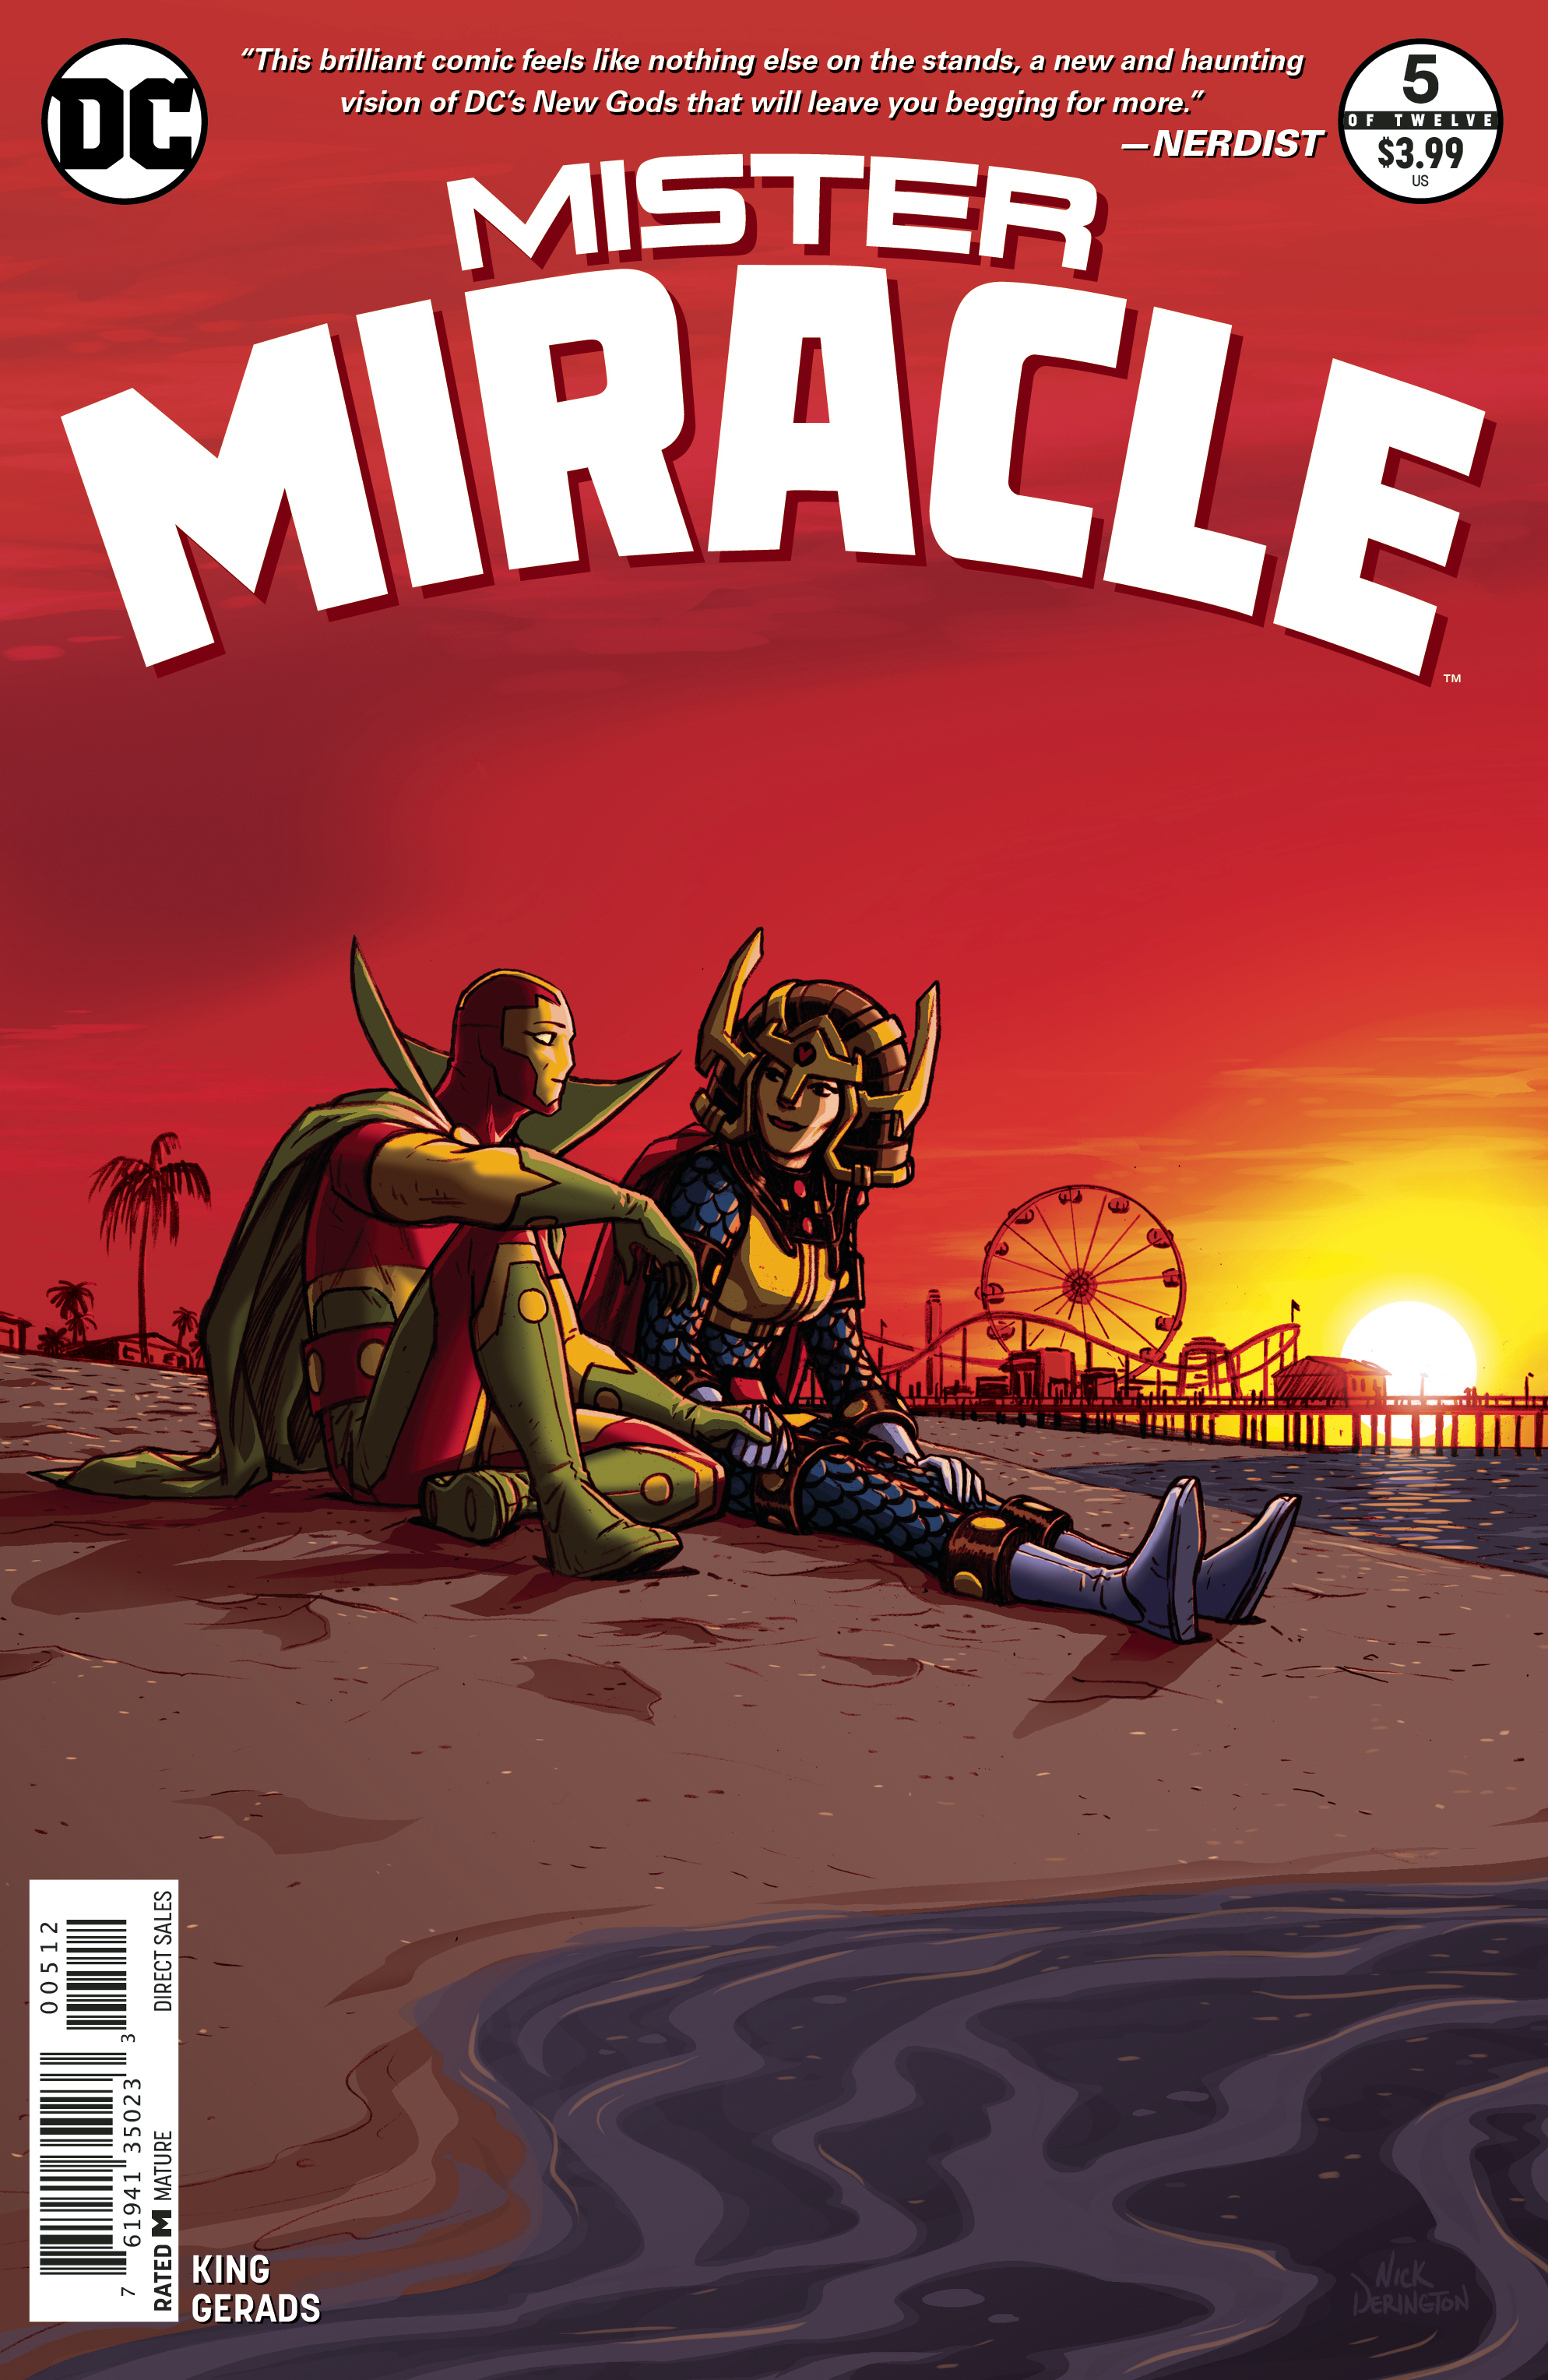 MISTER MIRACLE #5 (OF 12) 2ND PTG (MR)